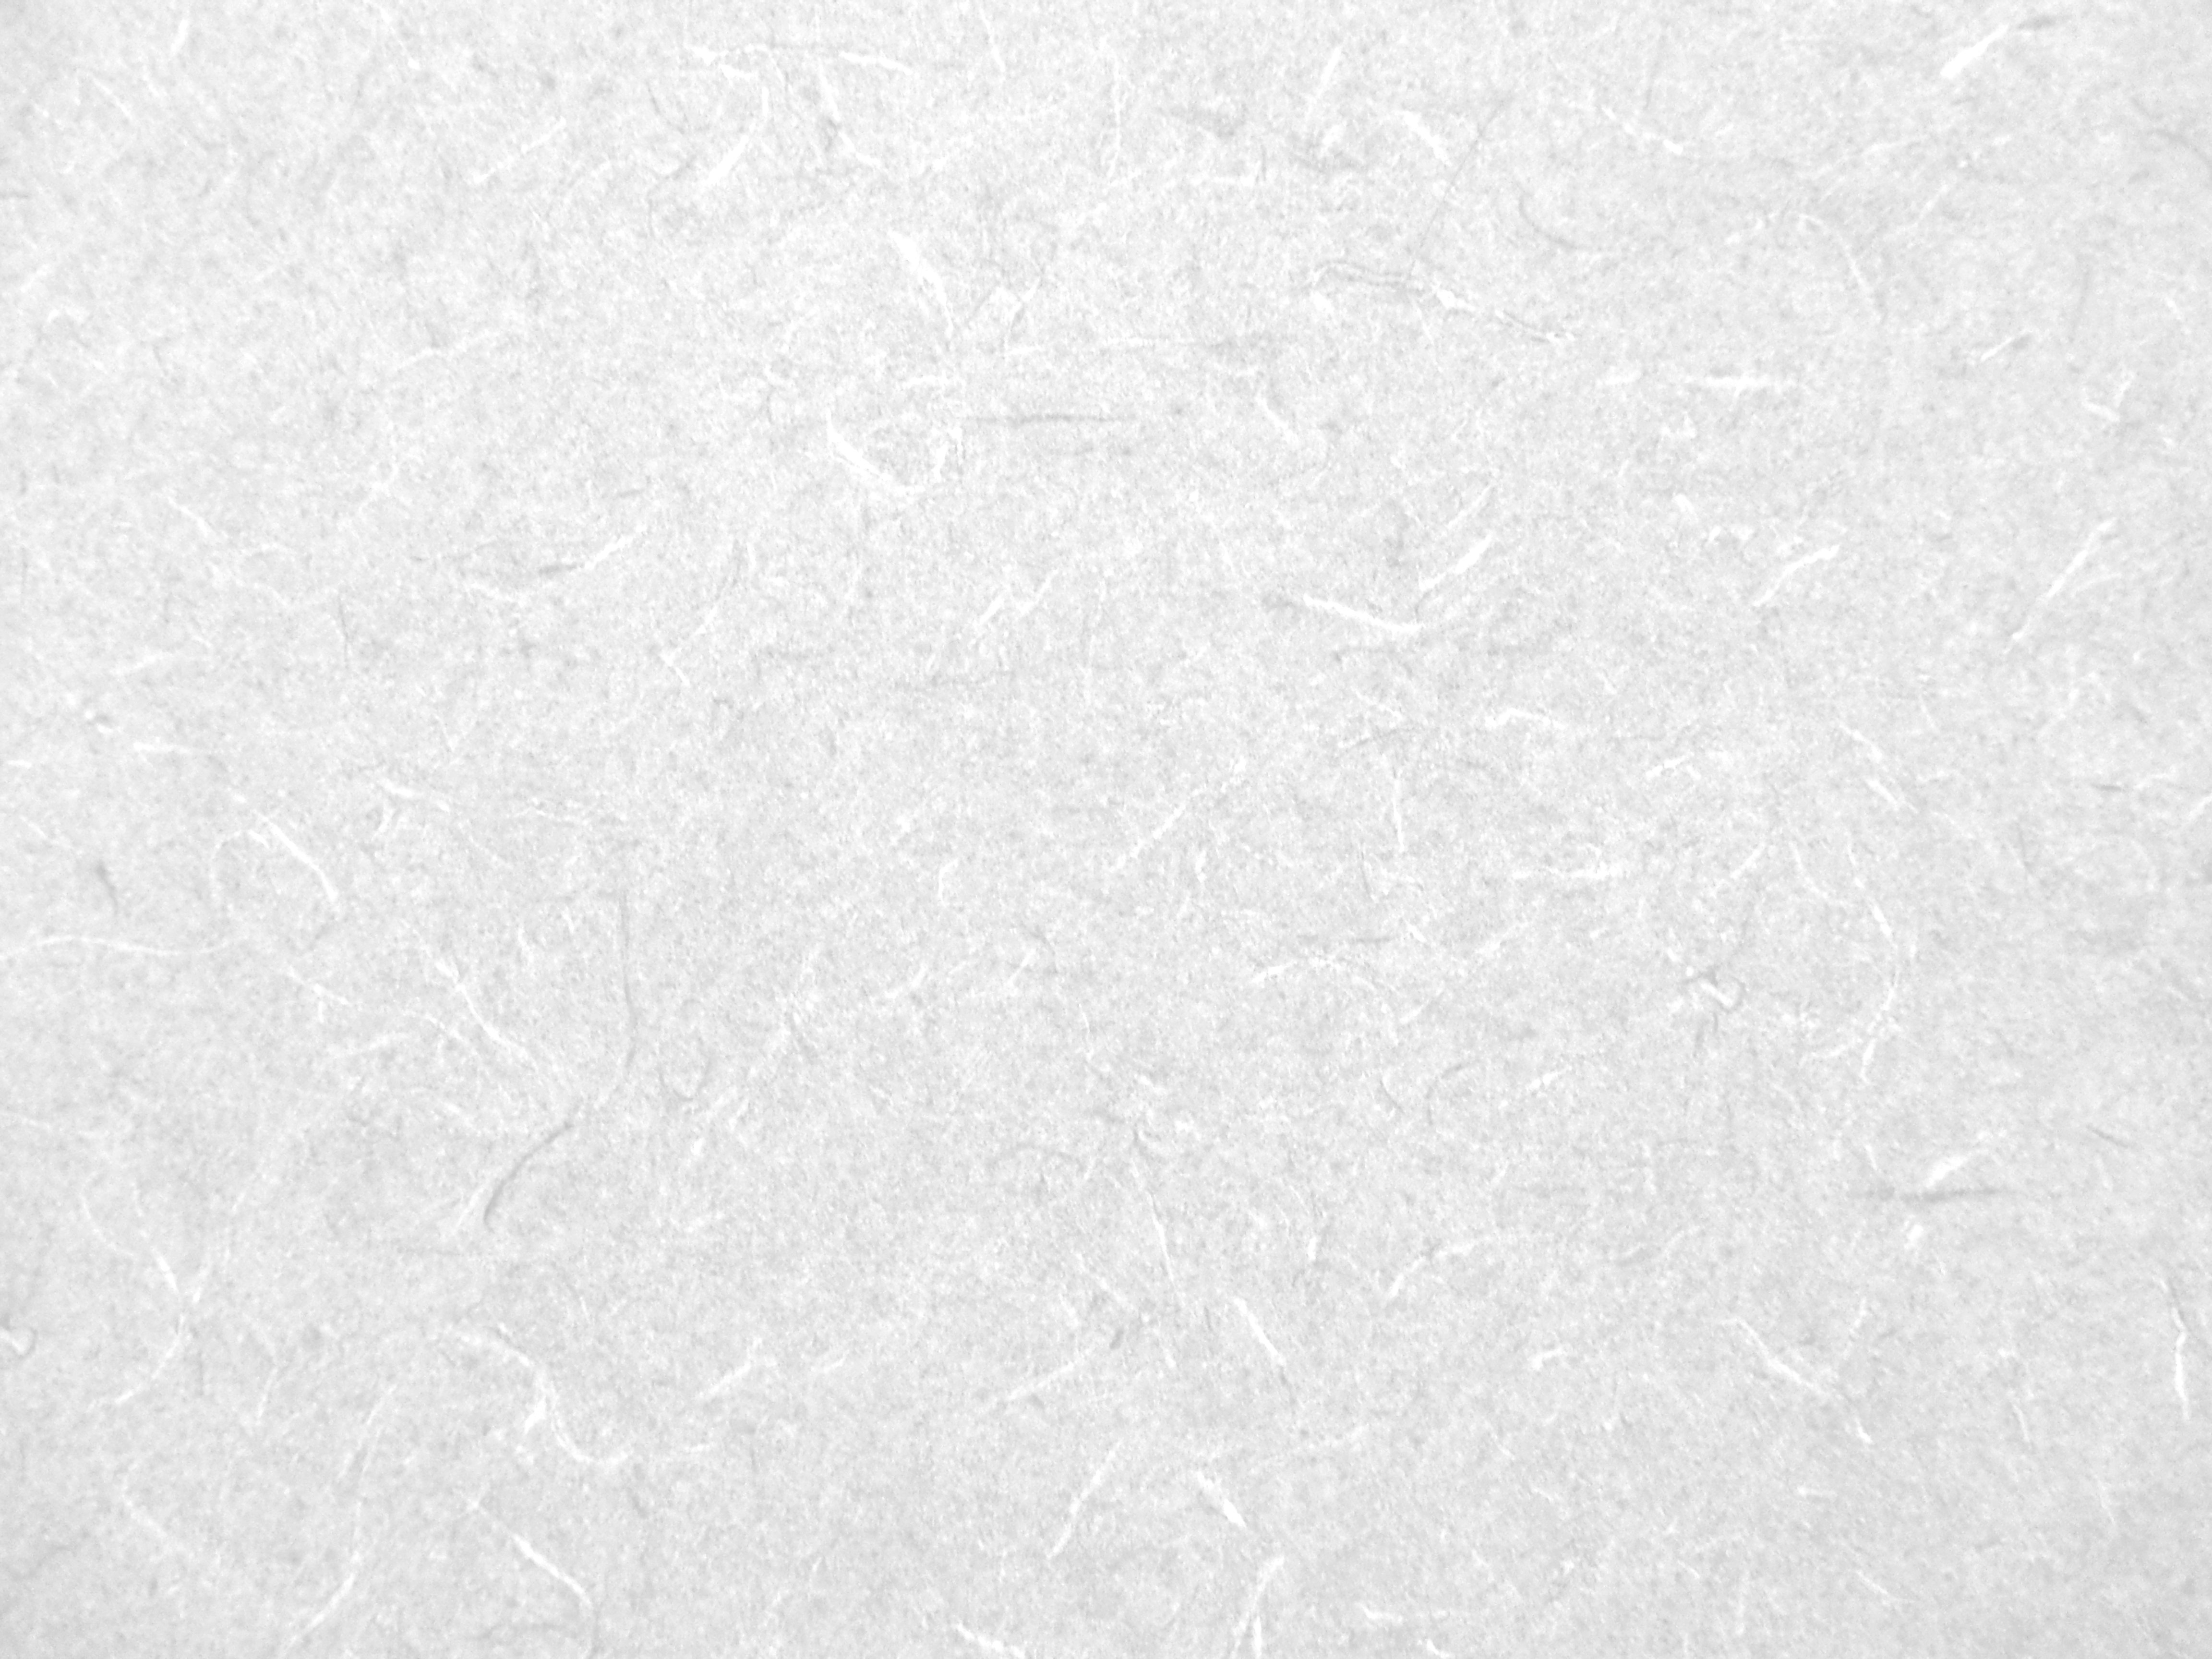 White Cardboard Texture Image Crazy Gallery